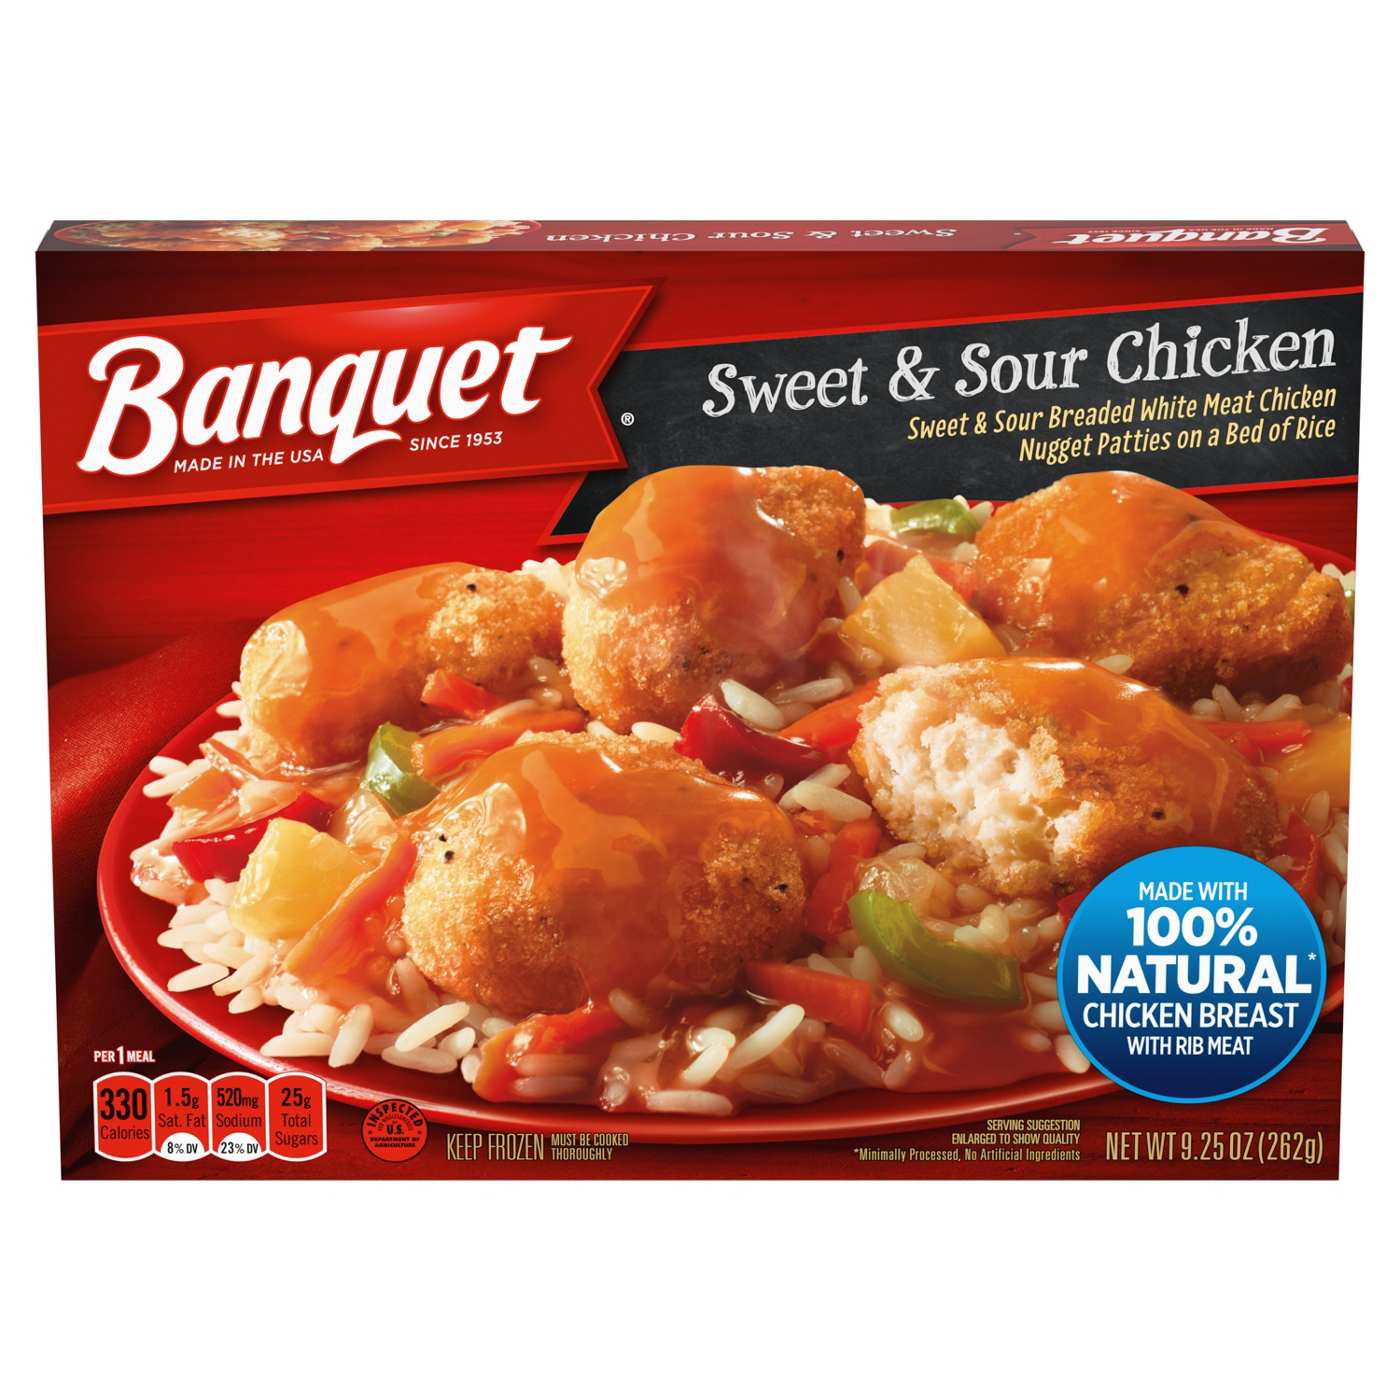 Banquet Sweet & Sour Chicken Frozen Meal; image 1 of 4